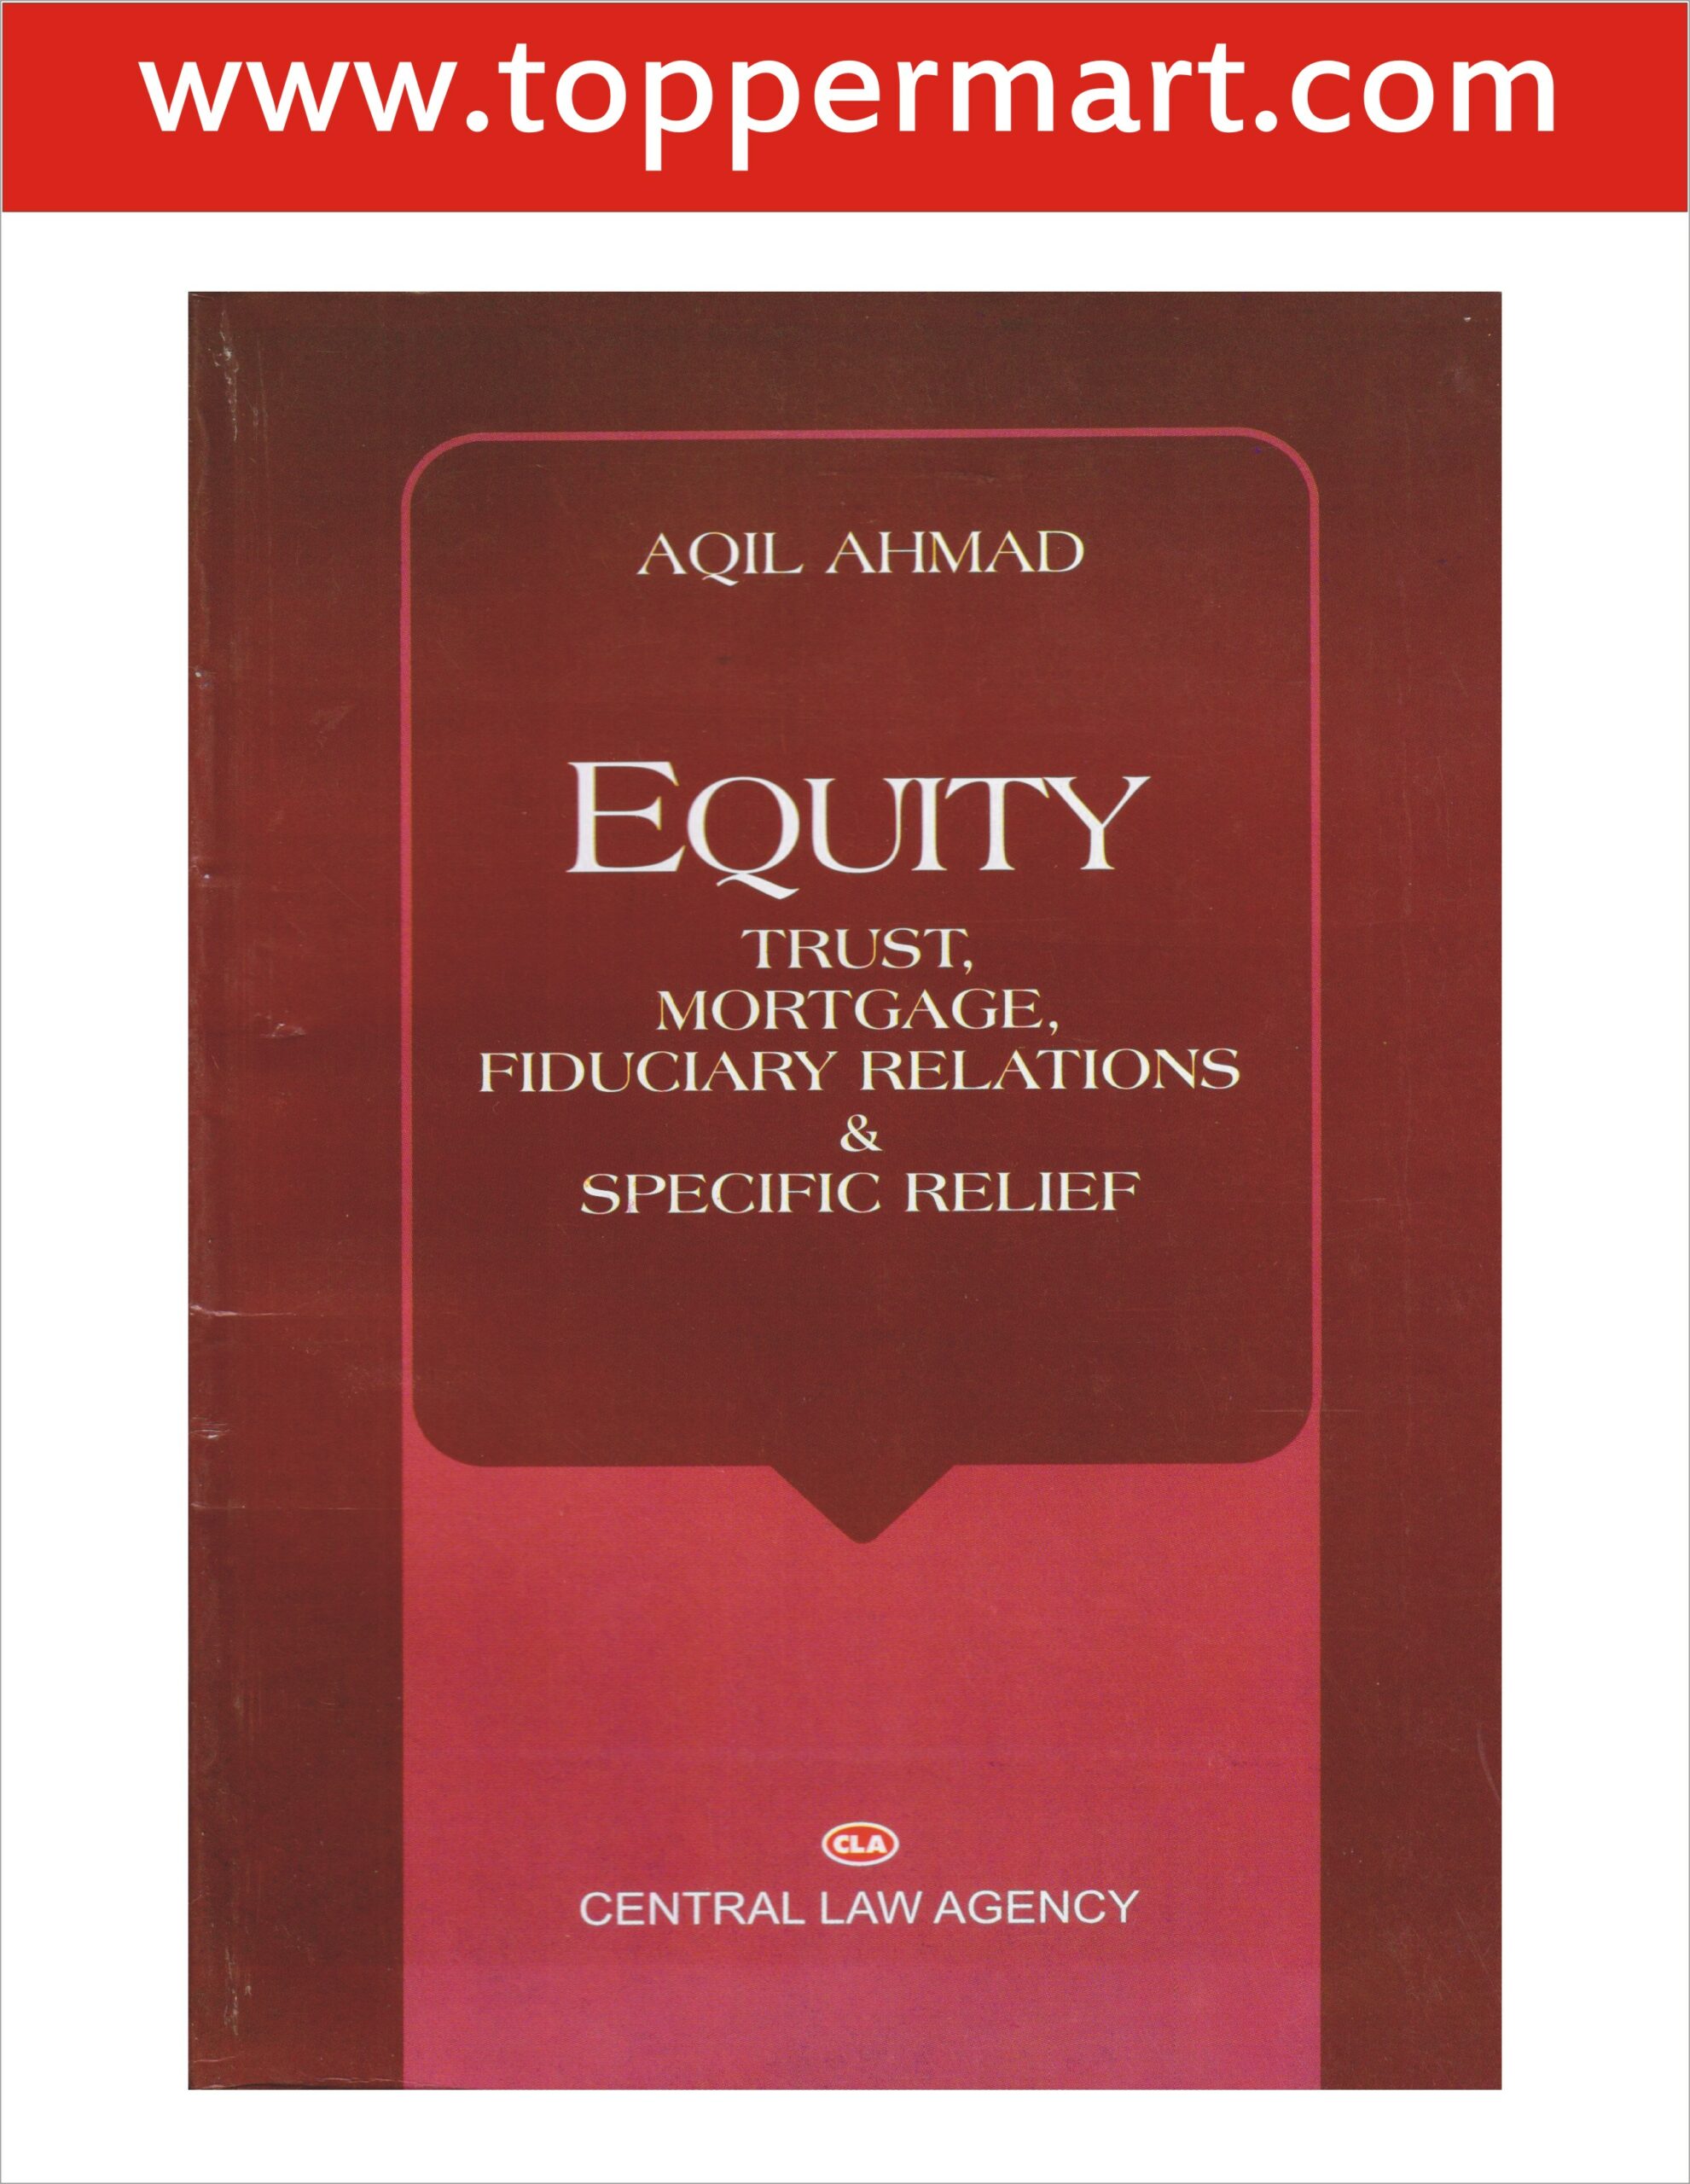 Equity trust mortage fiduciary relations& specific Relief Central law Agency